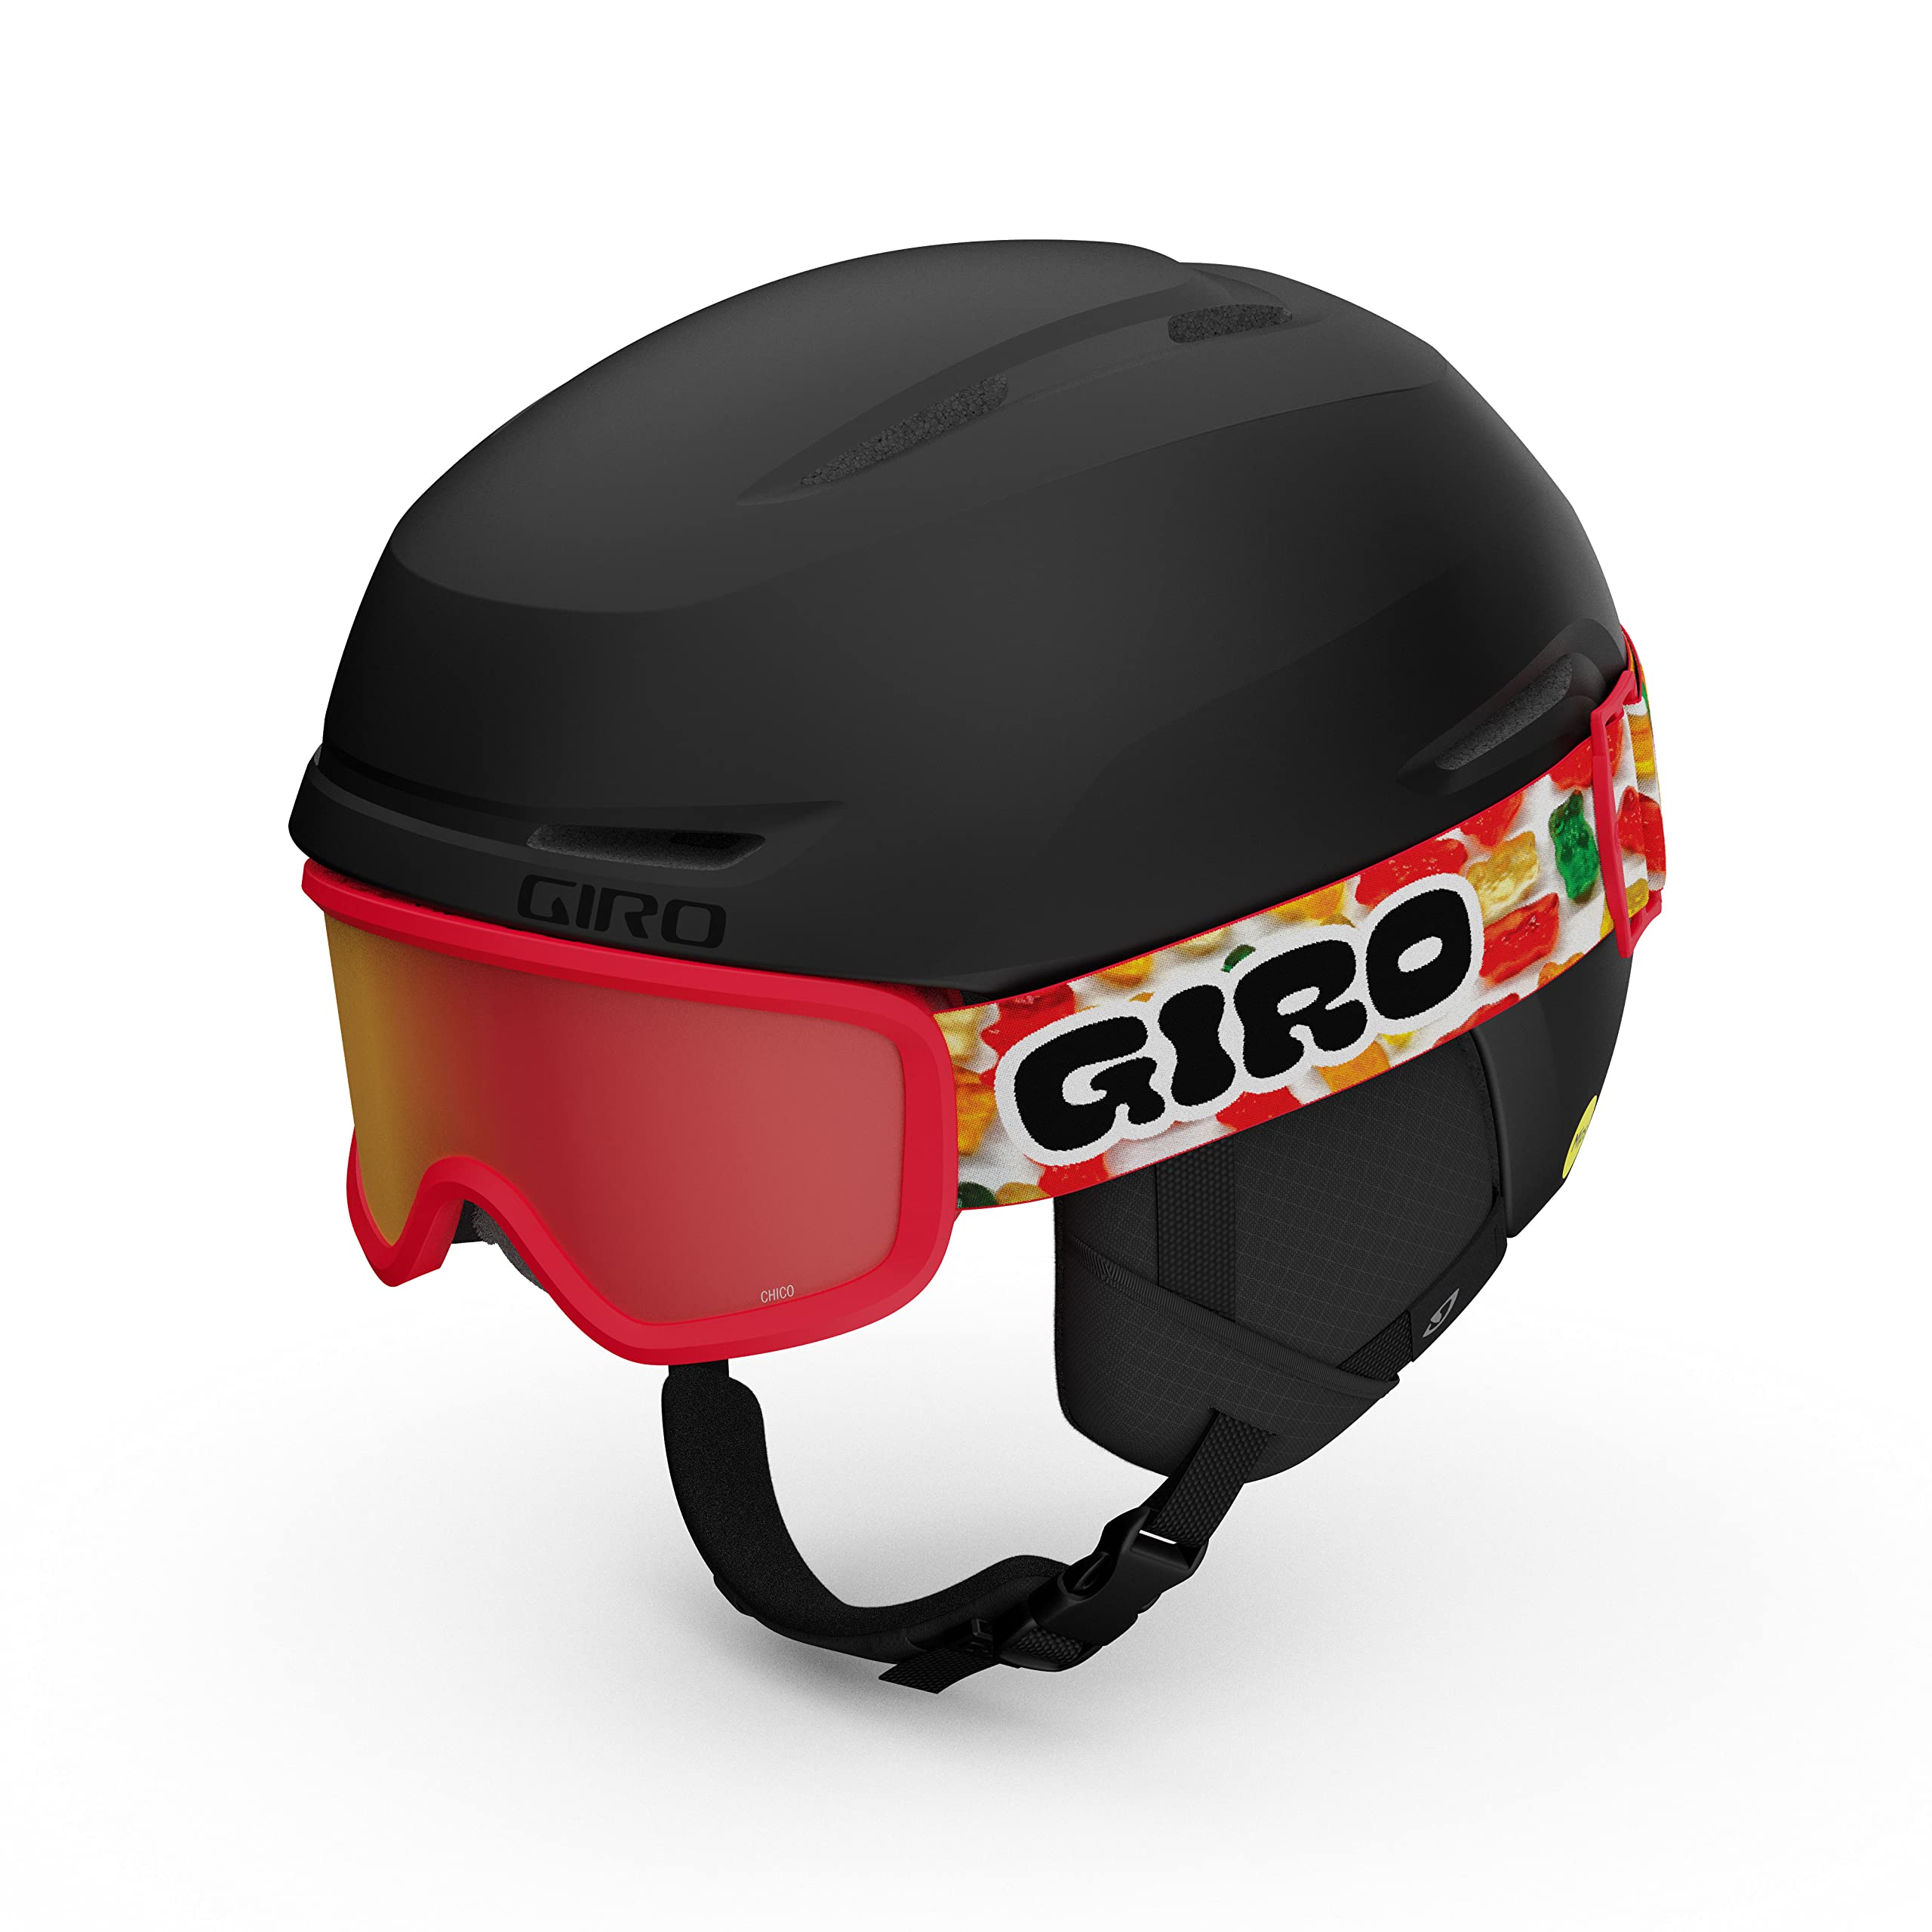 Giro Spur Combo Pack Kids Ski Helmet - Snowboarding Helmet with Matching Goggles for Youth Boys and Girls - Matte Black S 5